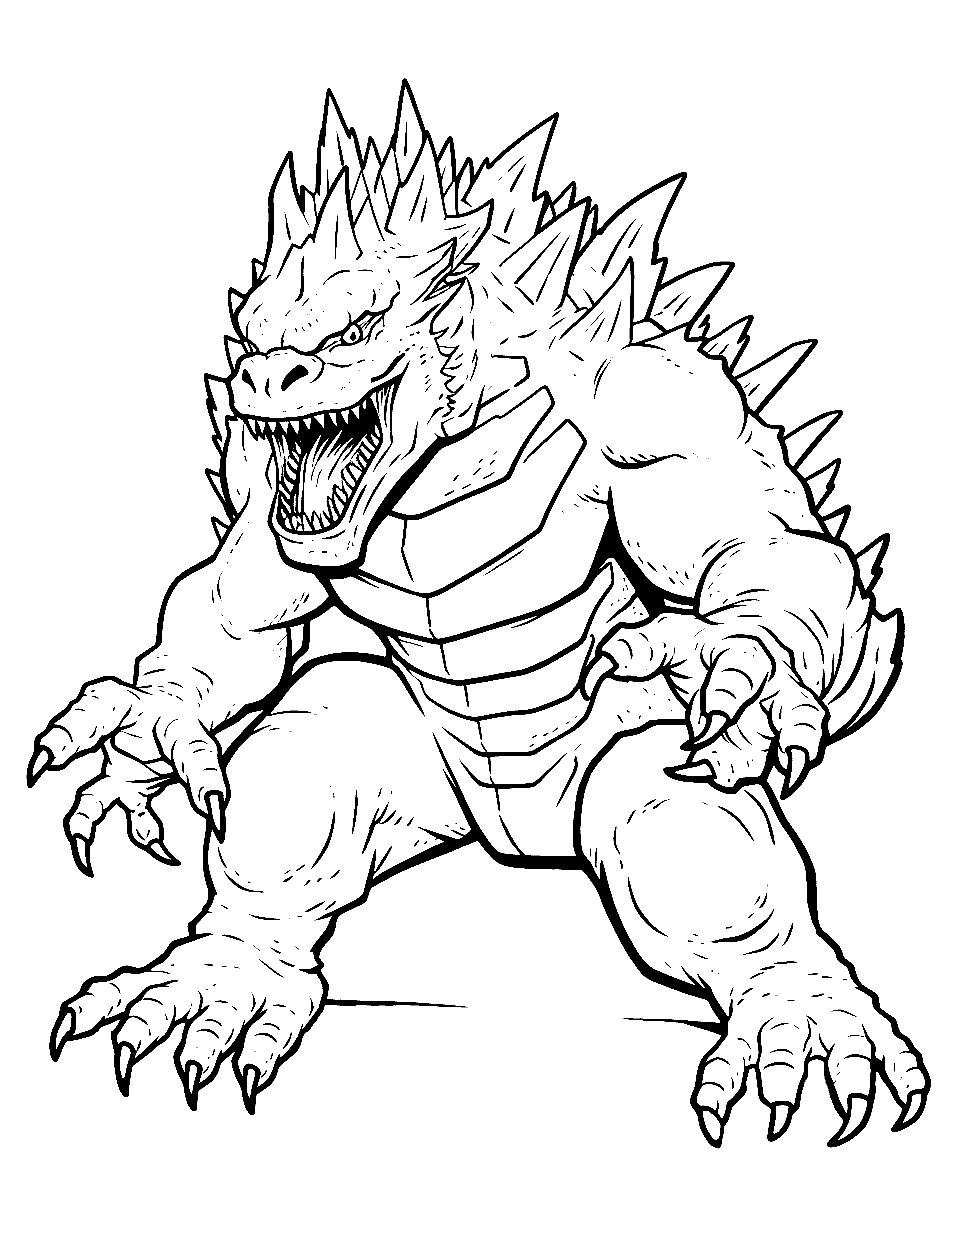 Kaiju Action Pose Coloring Page - An unidentified kaiju, poised for battle with claws and teeth ready.